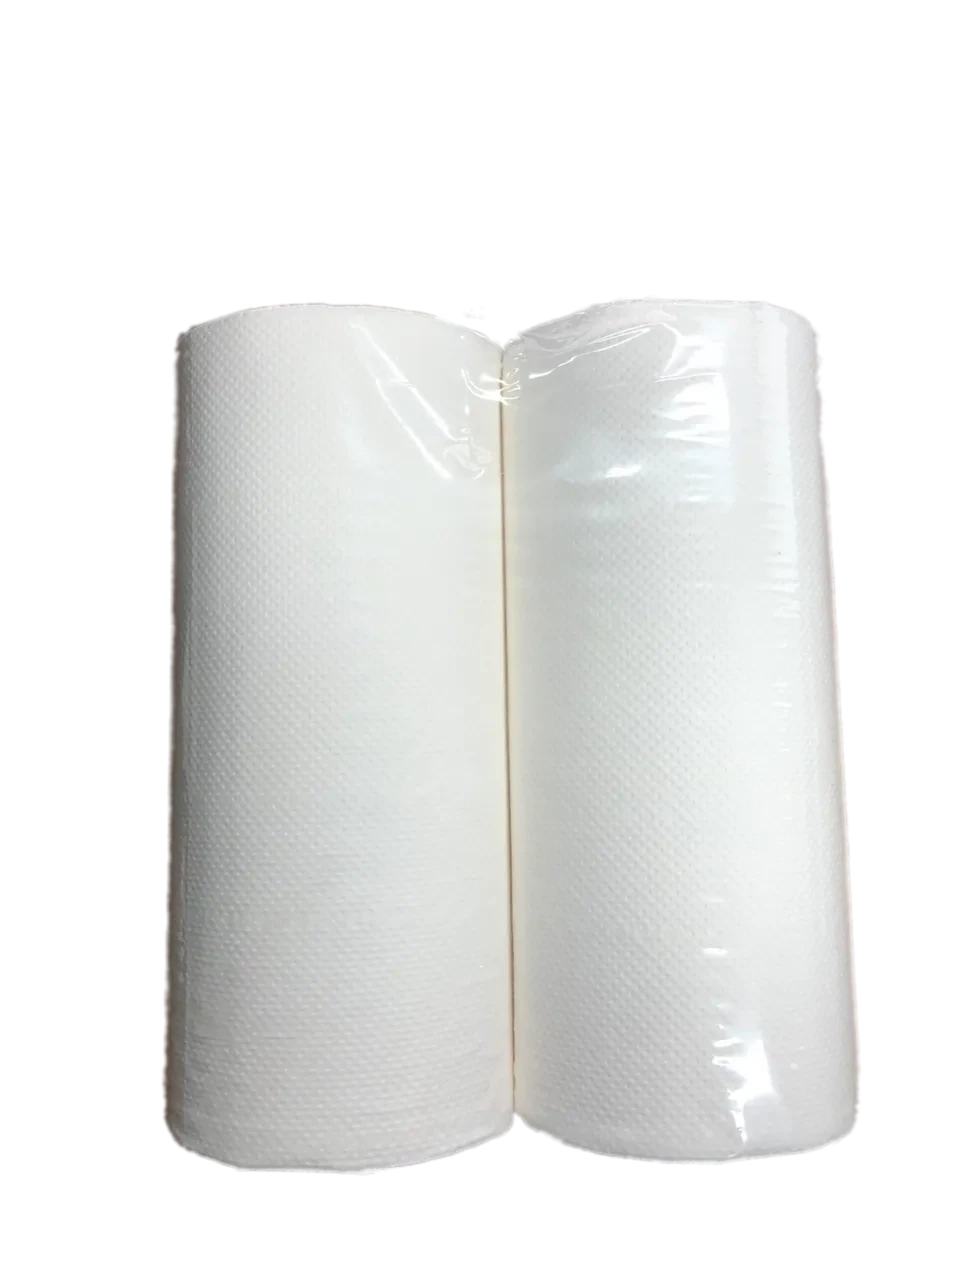 Cello 500mm Bedsheet Rolls Perforated Paper (50m x 10 rolls box)